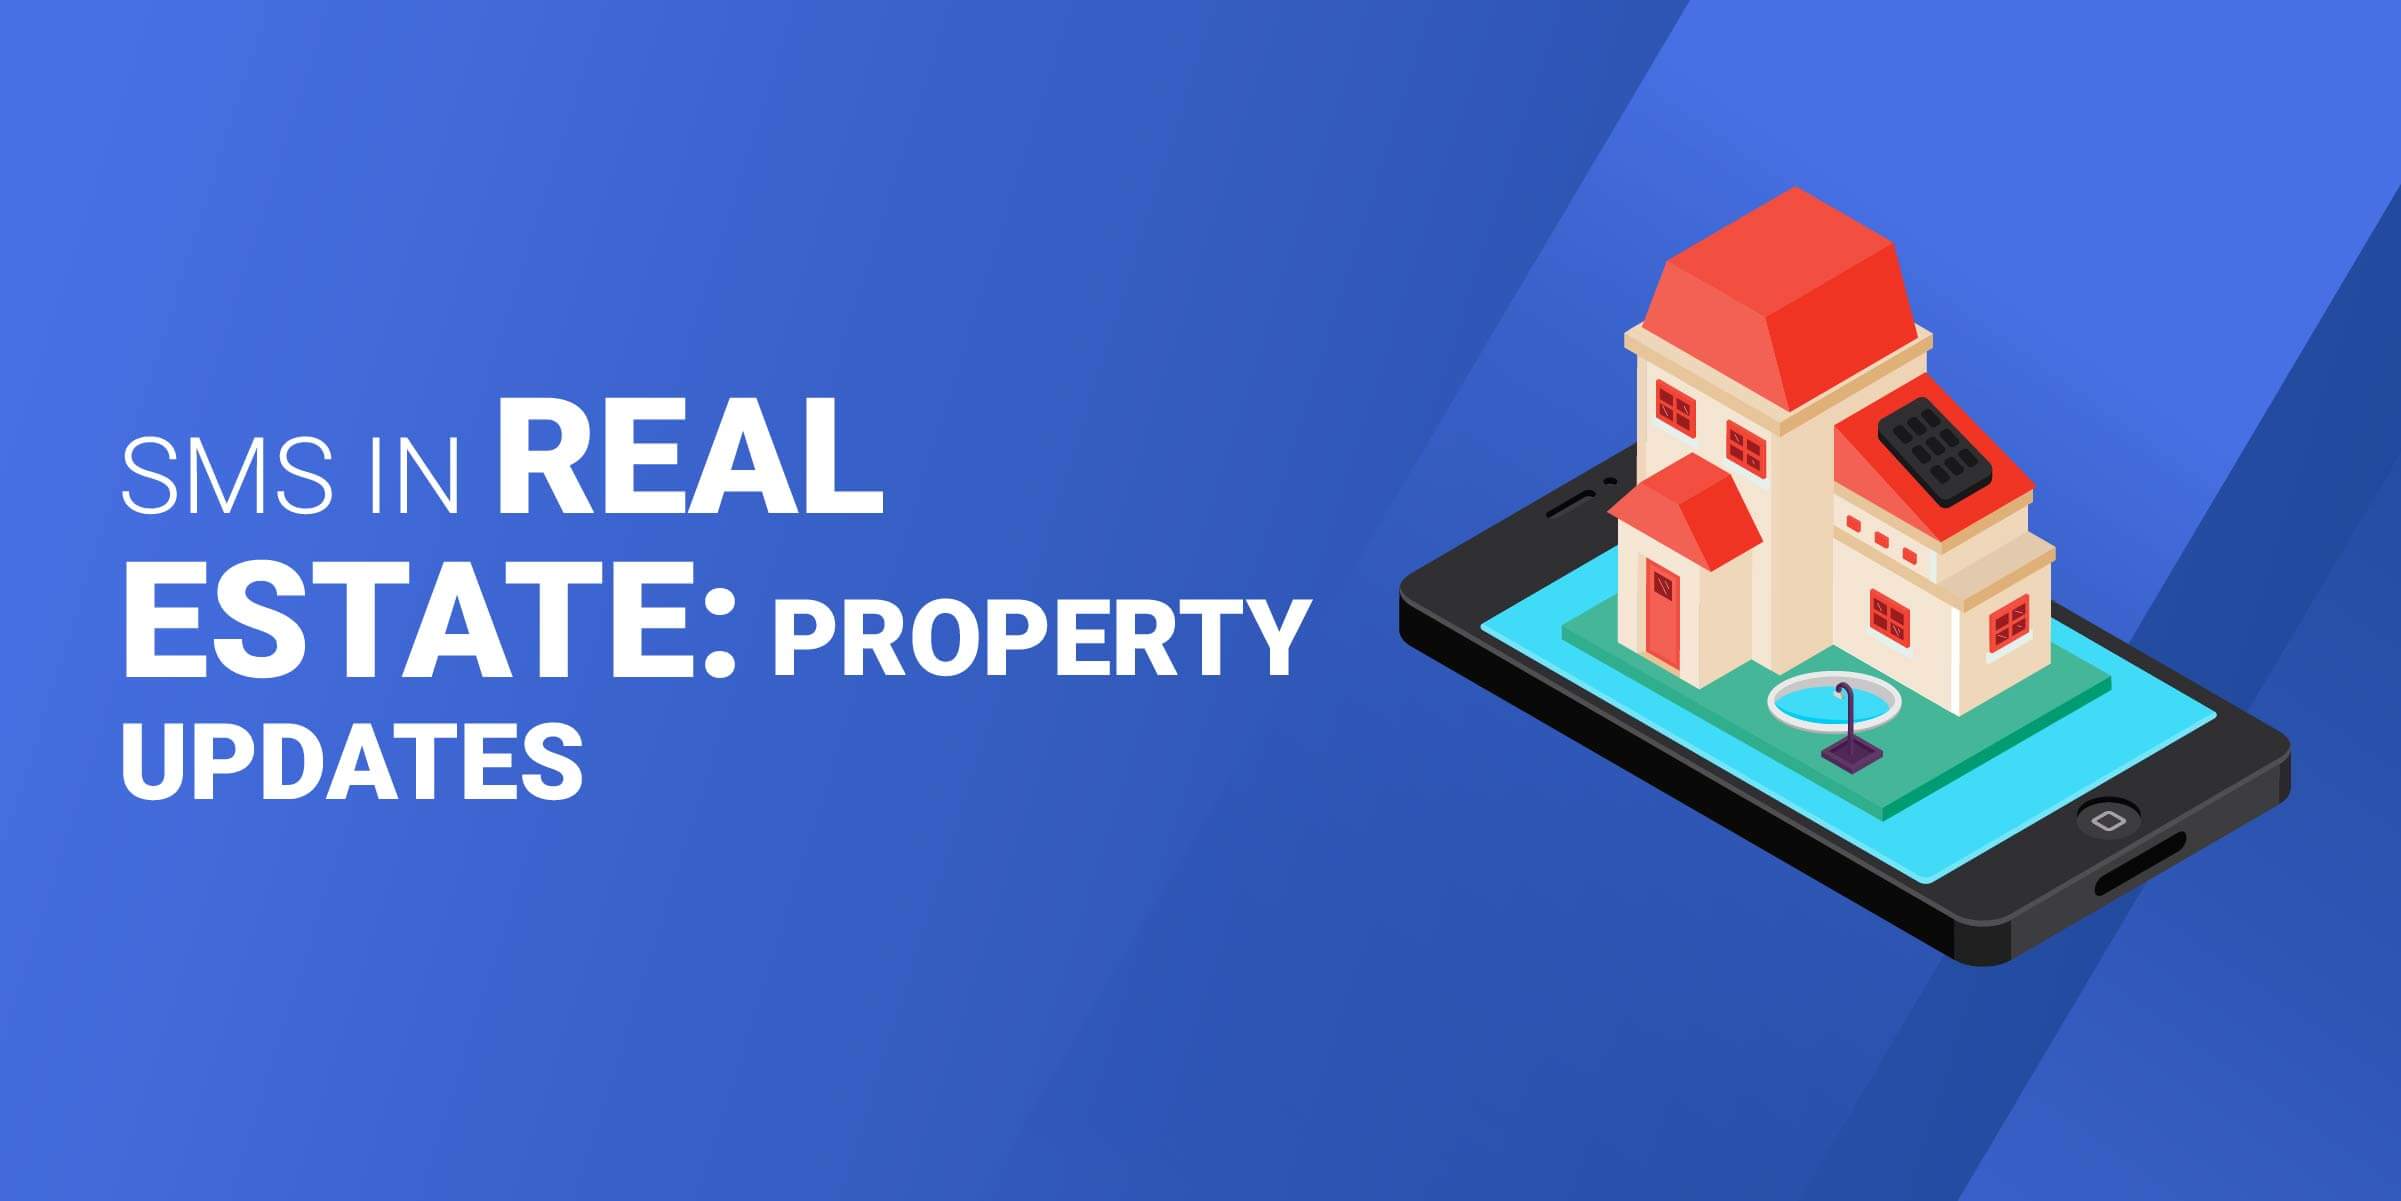 SMS in Real Estate Property Updates